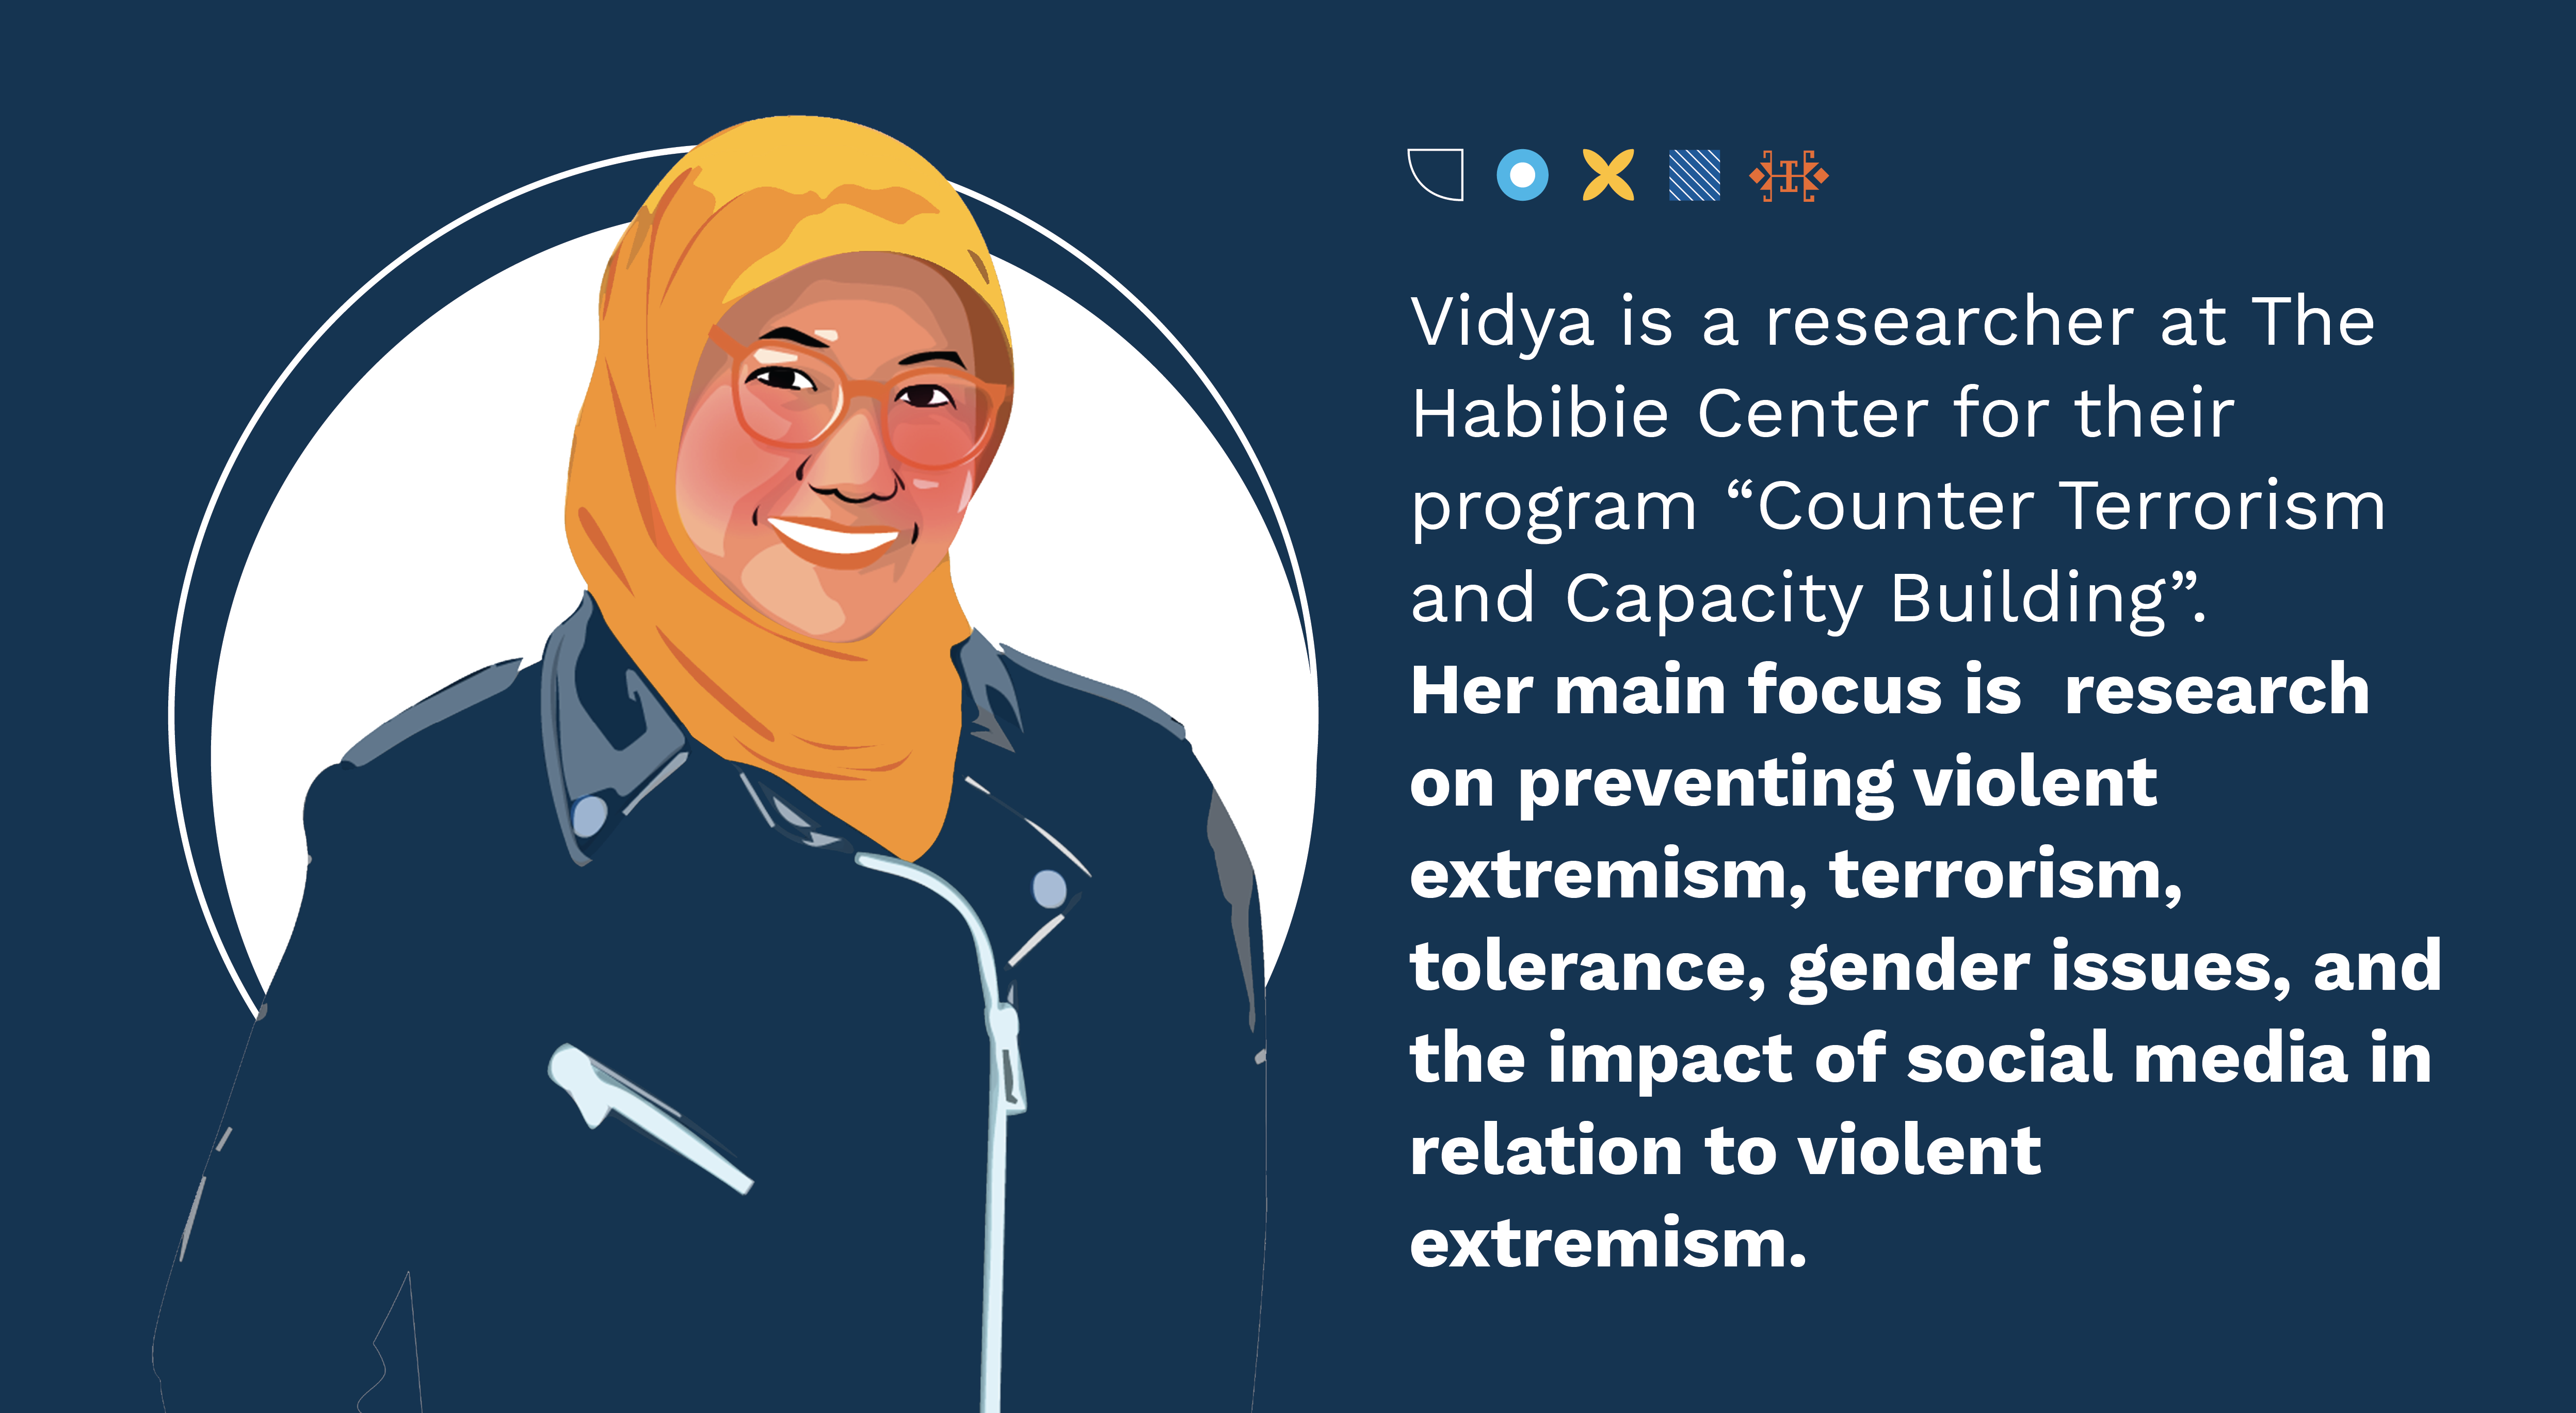 Interview with Vidya Hutagalung